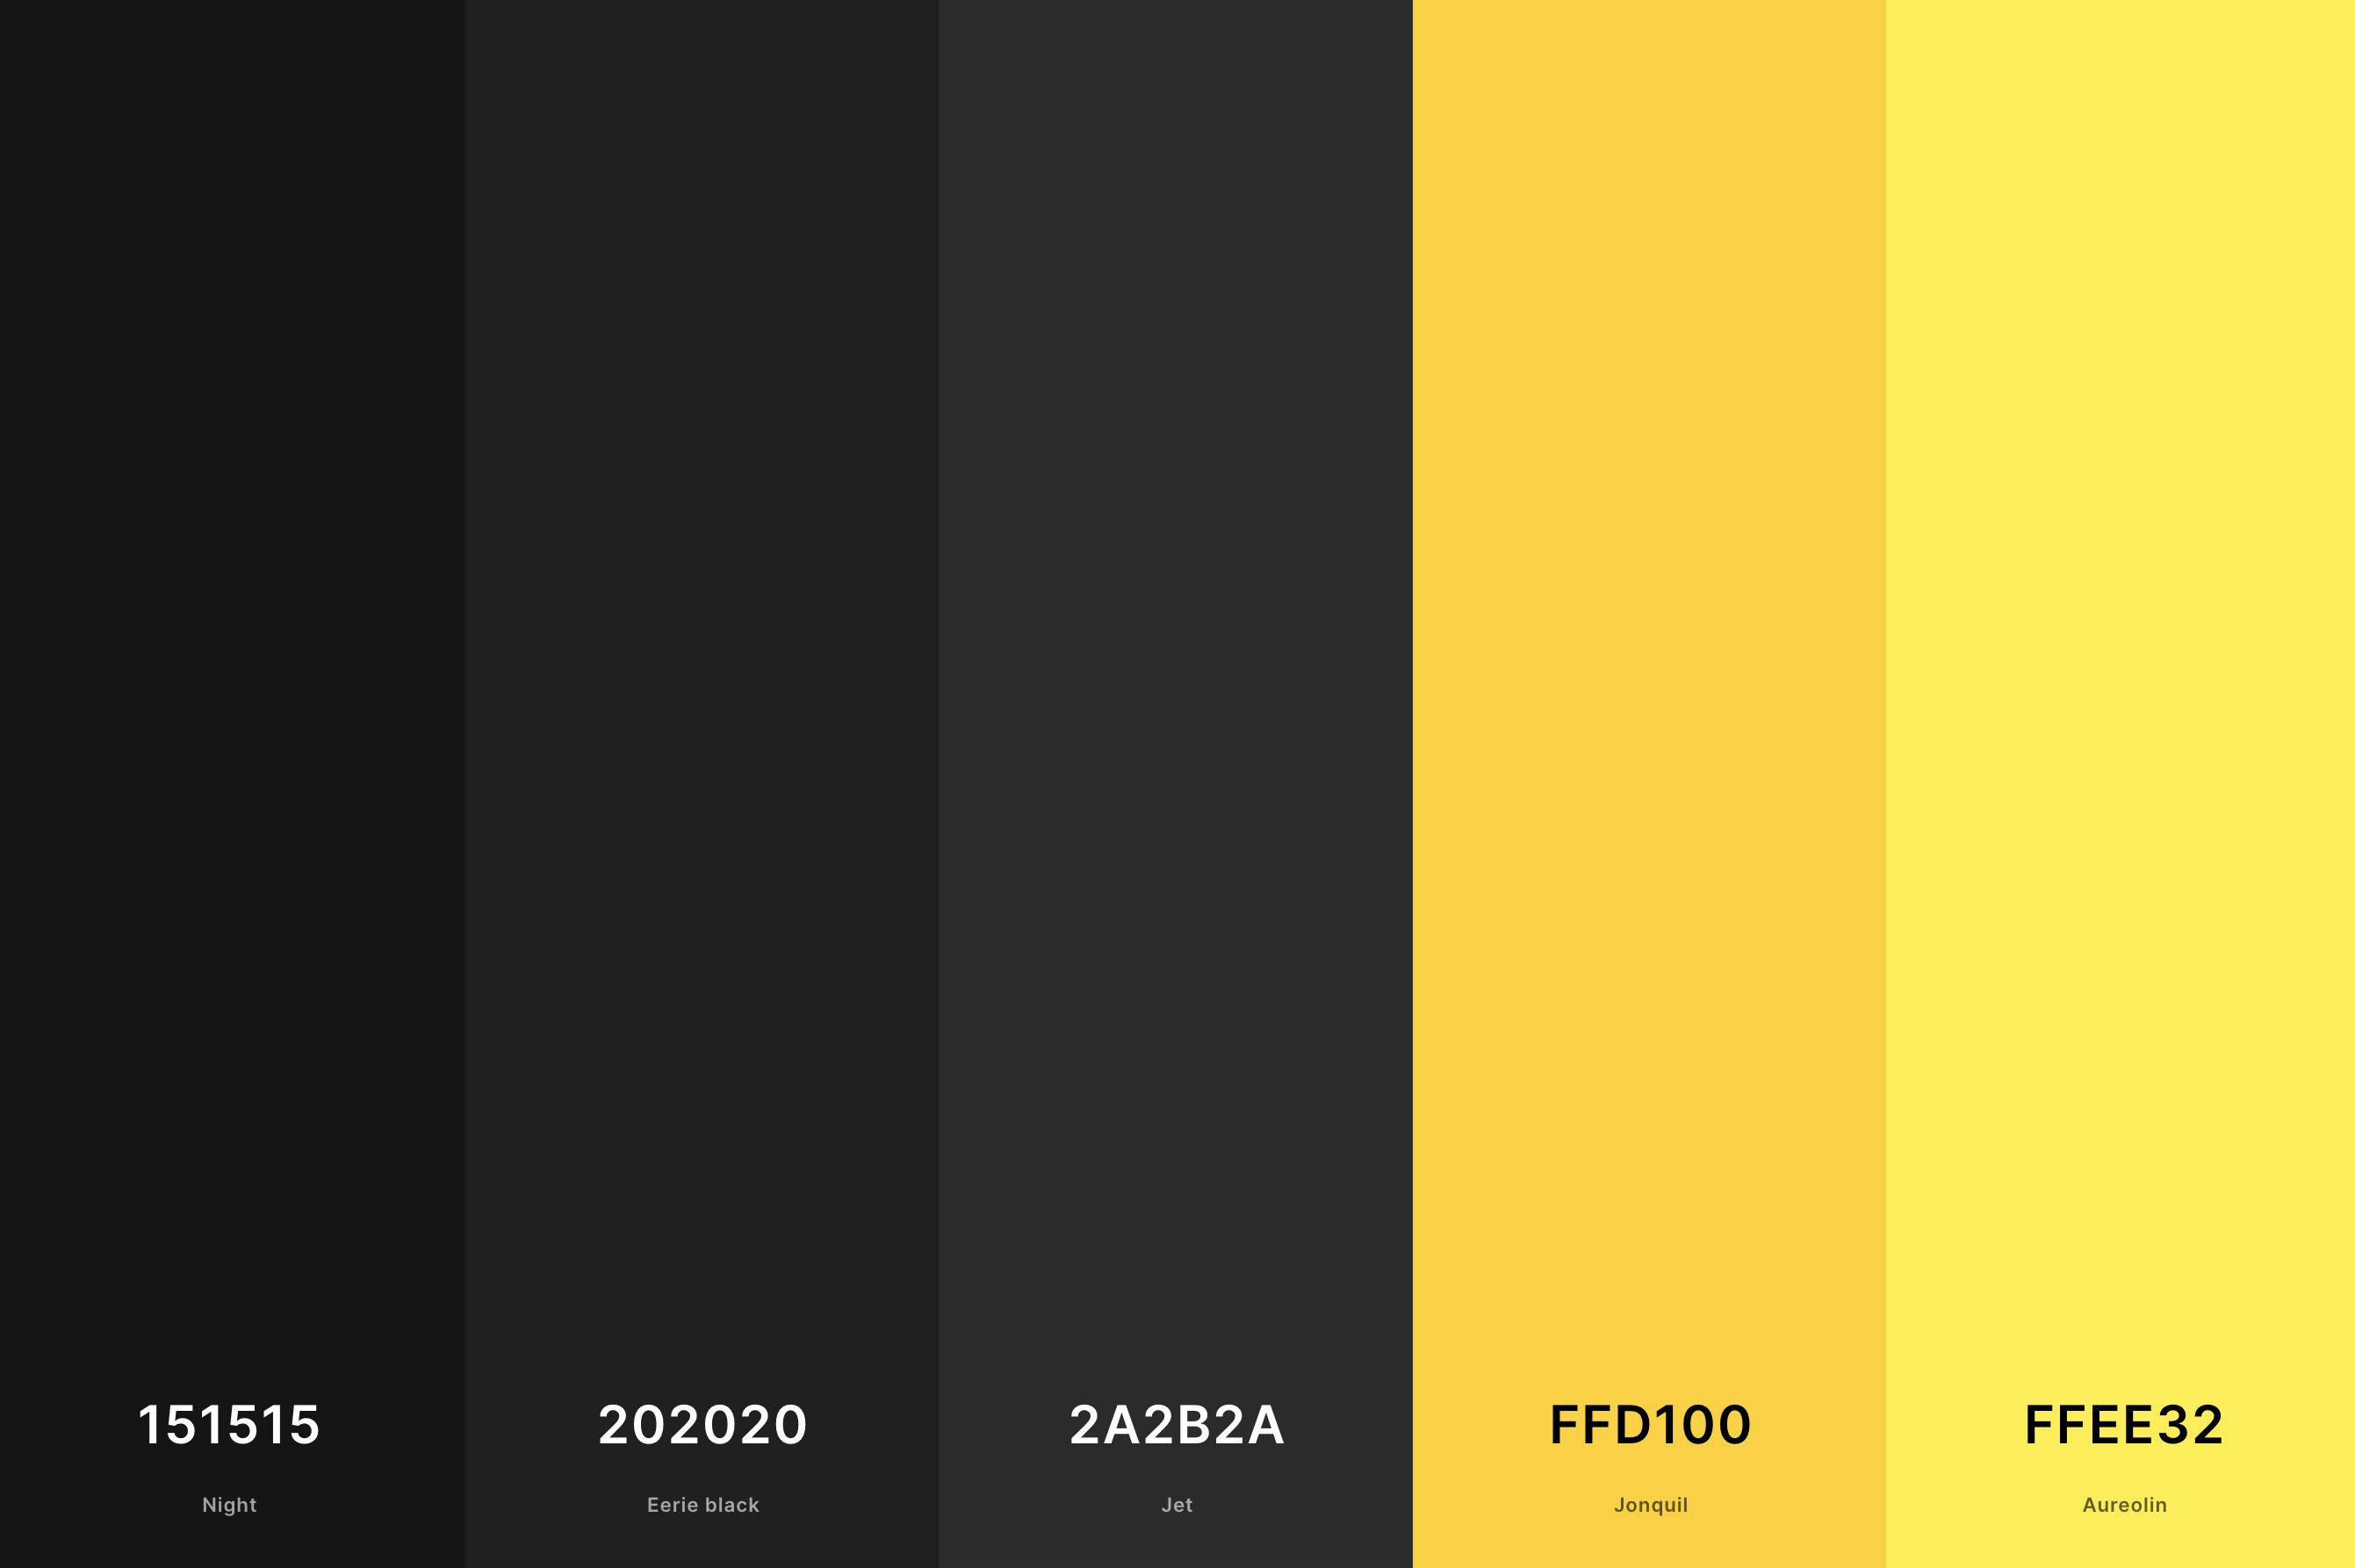 6. Black And Yellow Color Palette Color Palette with Night (Hex #151515) + Eerie Black (Hex #202020) + Jet (Hex #2A2B2A) + Jonquil (Hex #FFD100) + Aureolin (Hex #FFEE32) Color Palette with Hex Codes